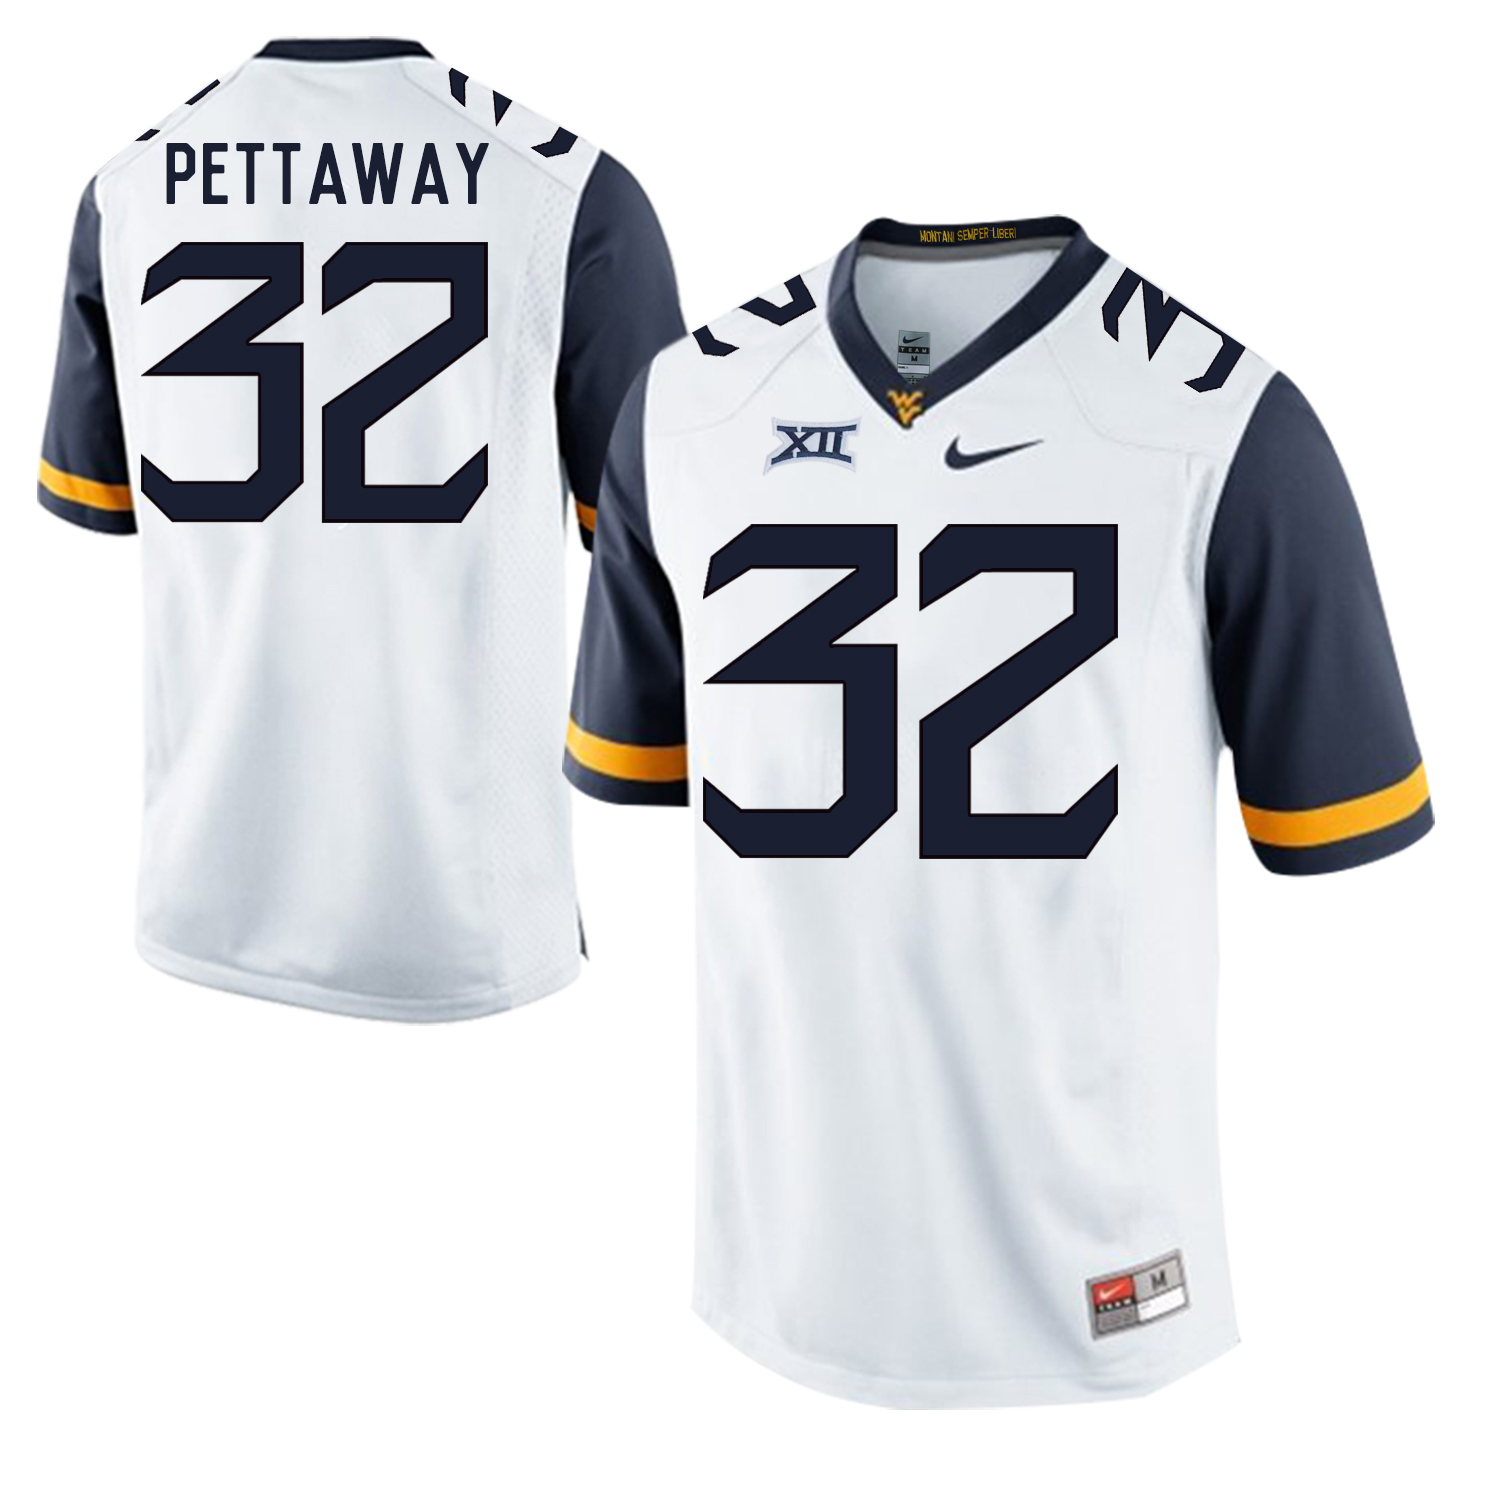 West Virginia Mountaineers 32 Martell Pettaway White College Football Jersey